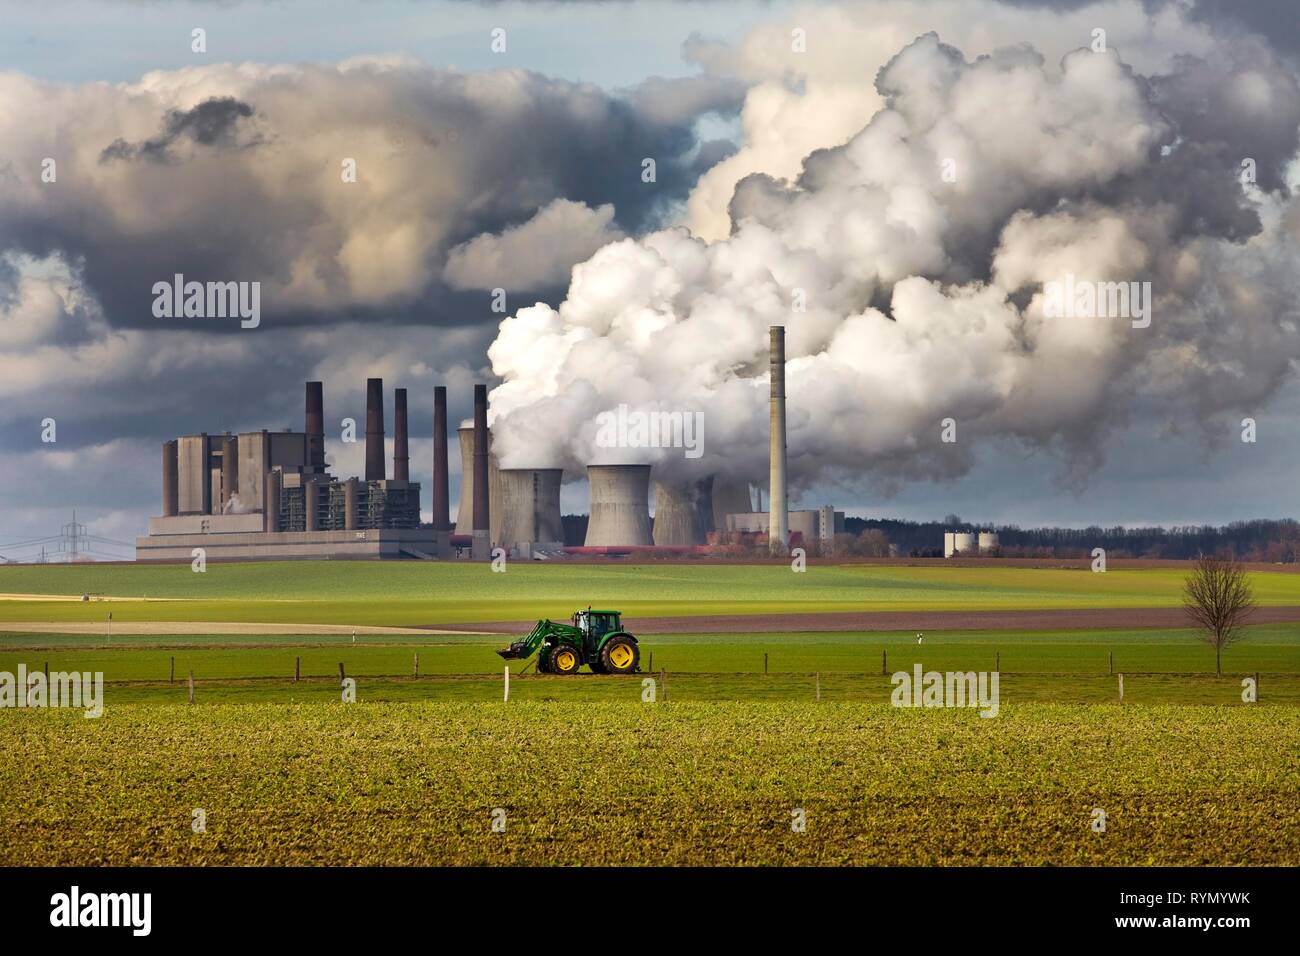 Tractor on a field in front of the steaming lignite-fired power station Frimmersdorf, Grevenbroich Stock Photo